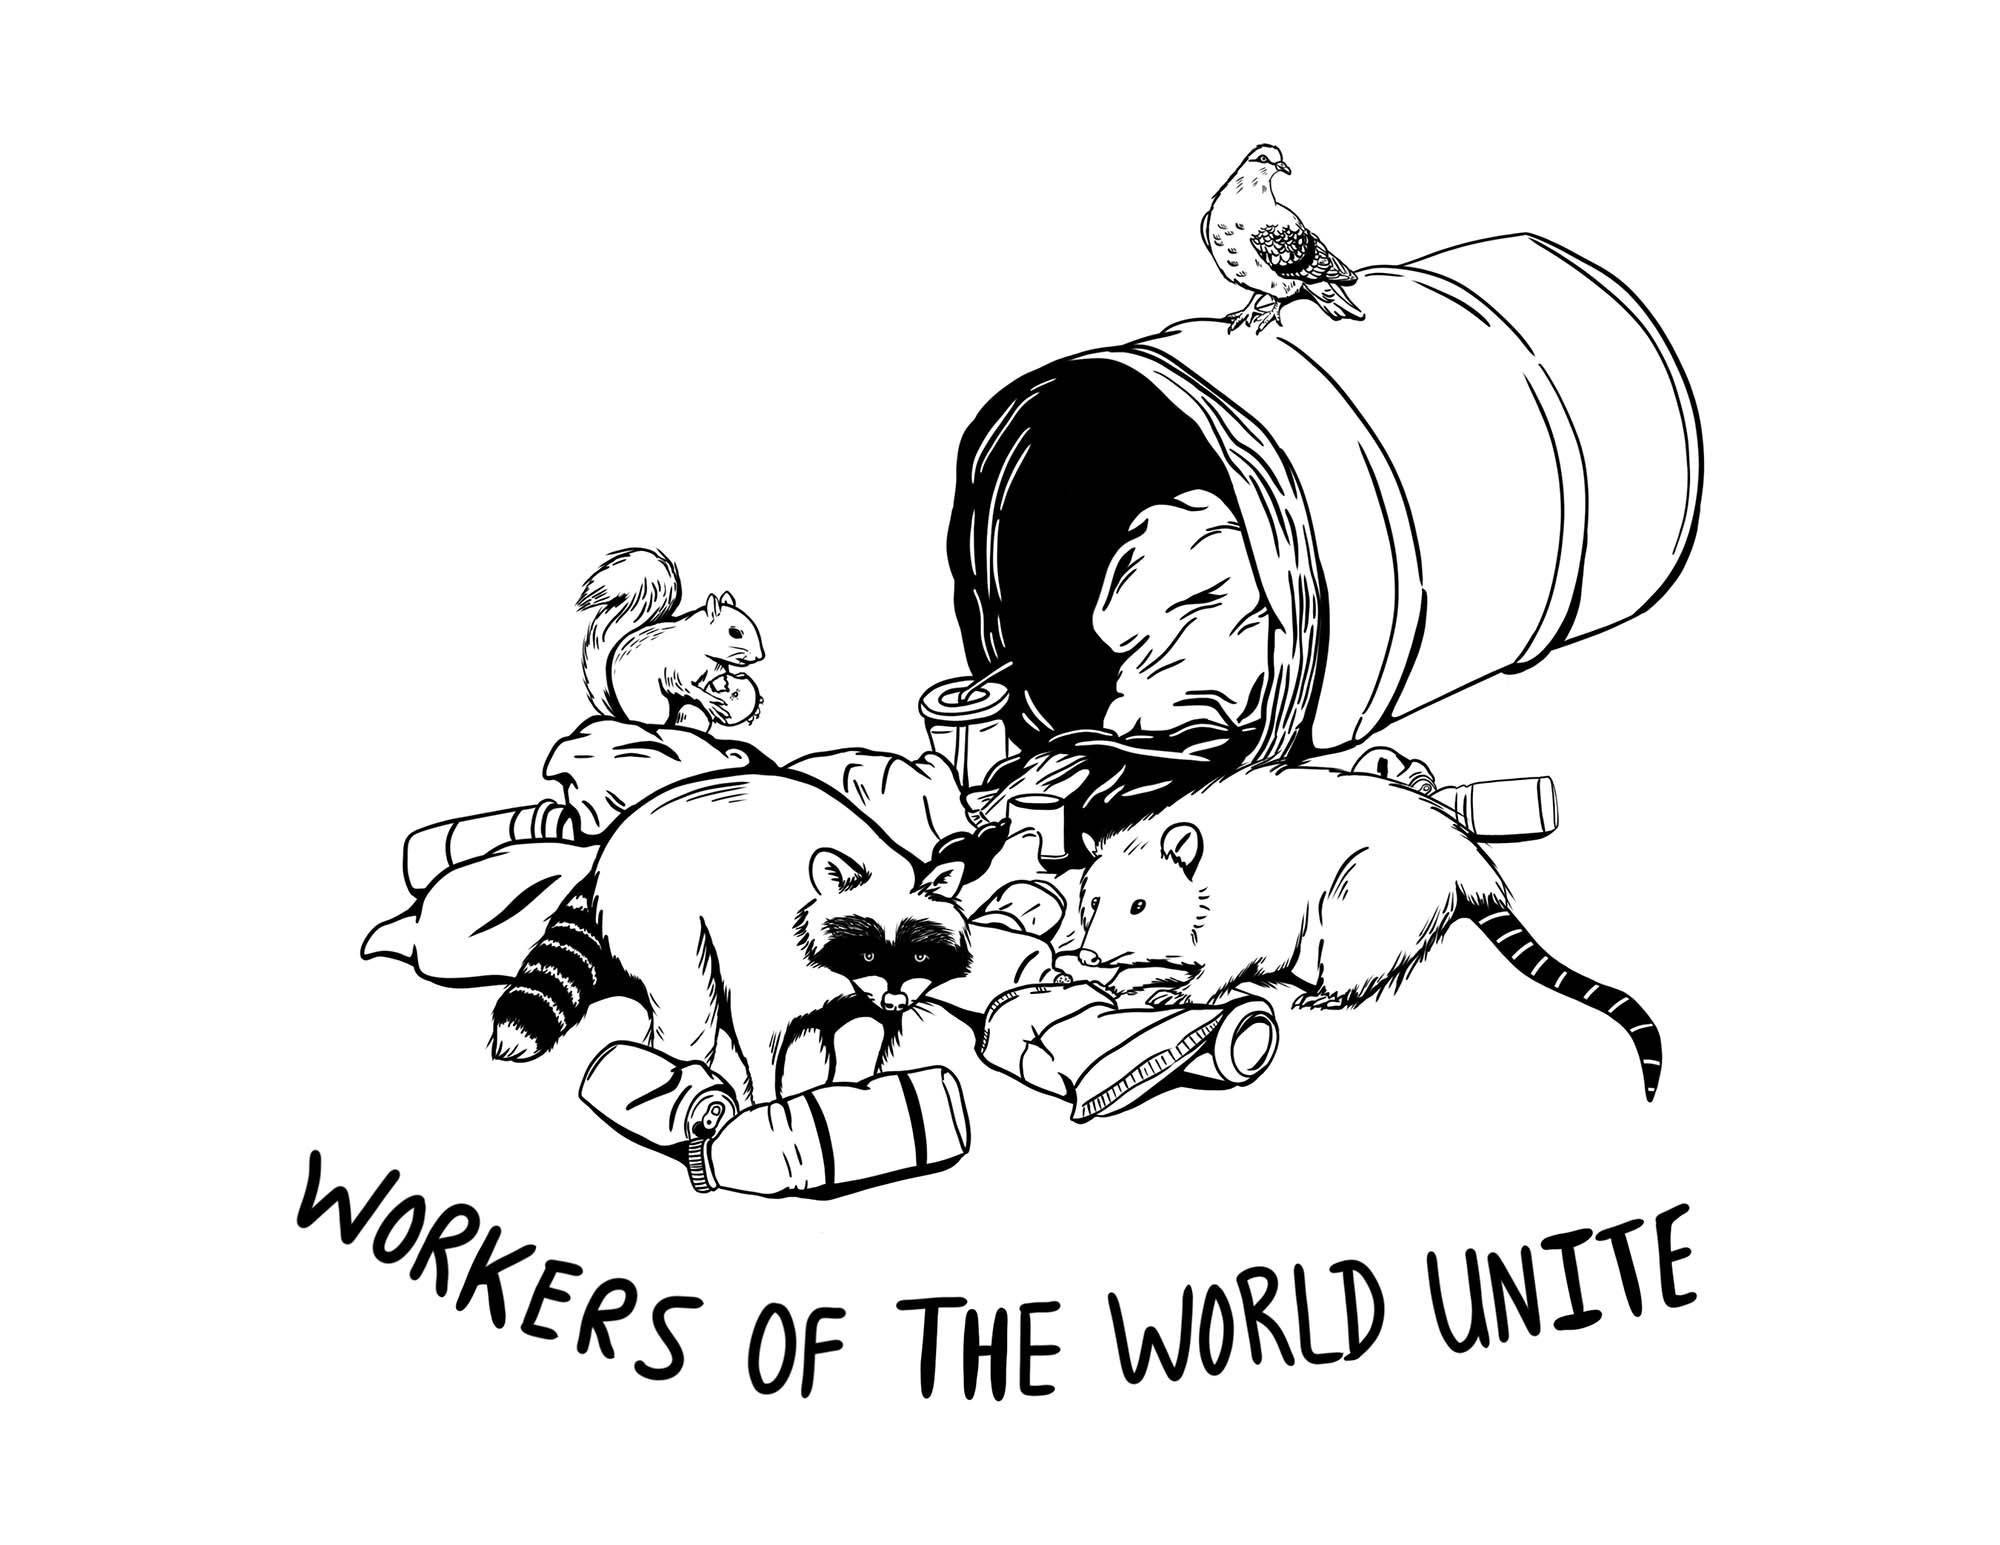 Overturned garbage can with squirrel, possum, raccoon, pigeon. Text reads "workers of the world unite"